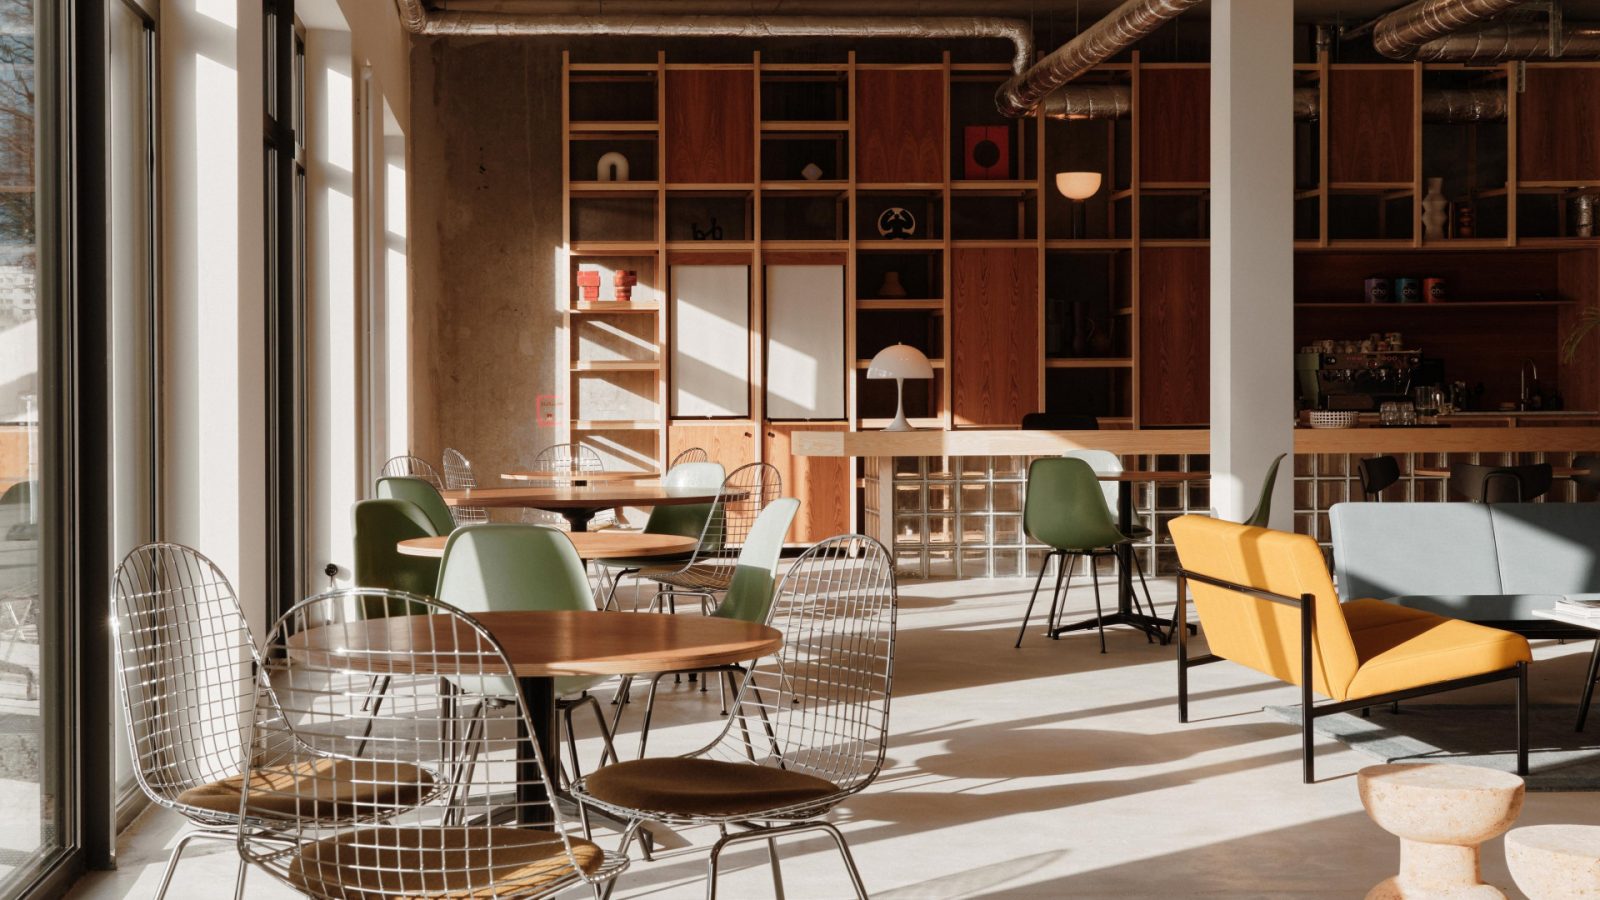 Co-working lobby at Denizen House with interiors designed by Modiste Studio